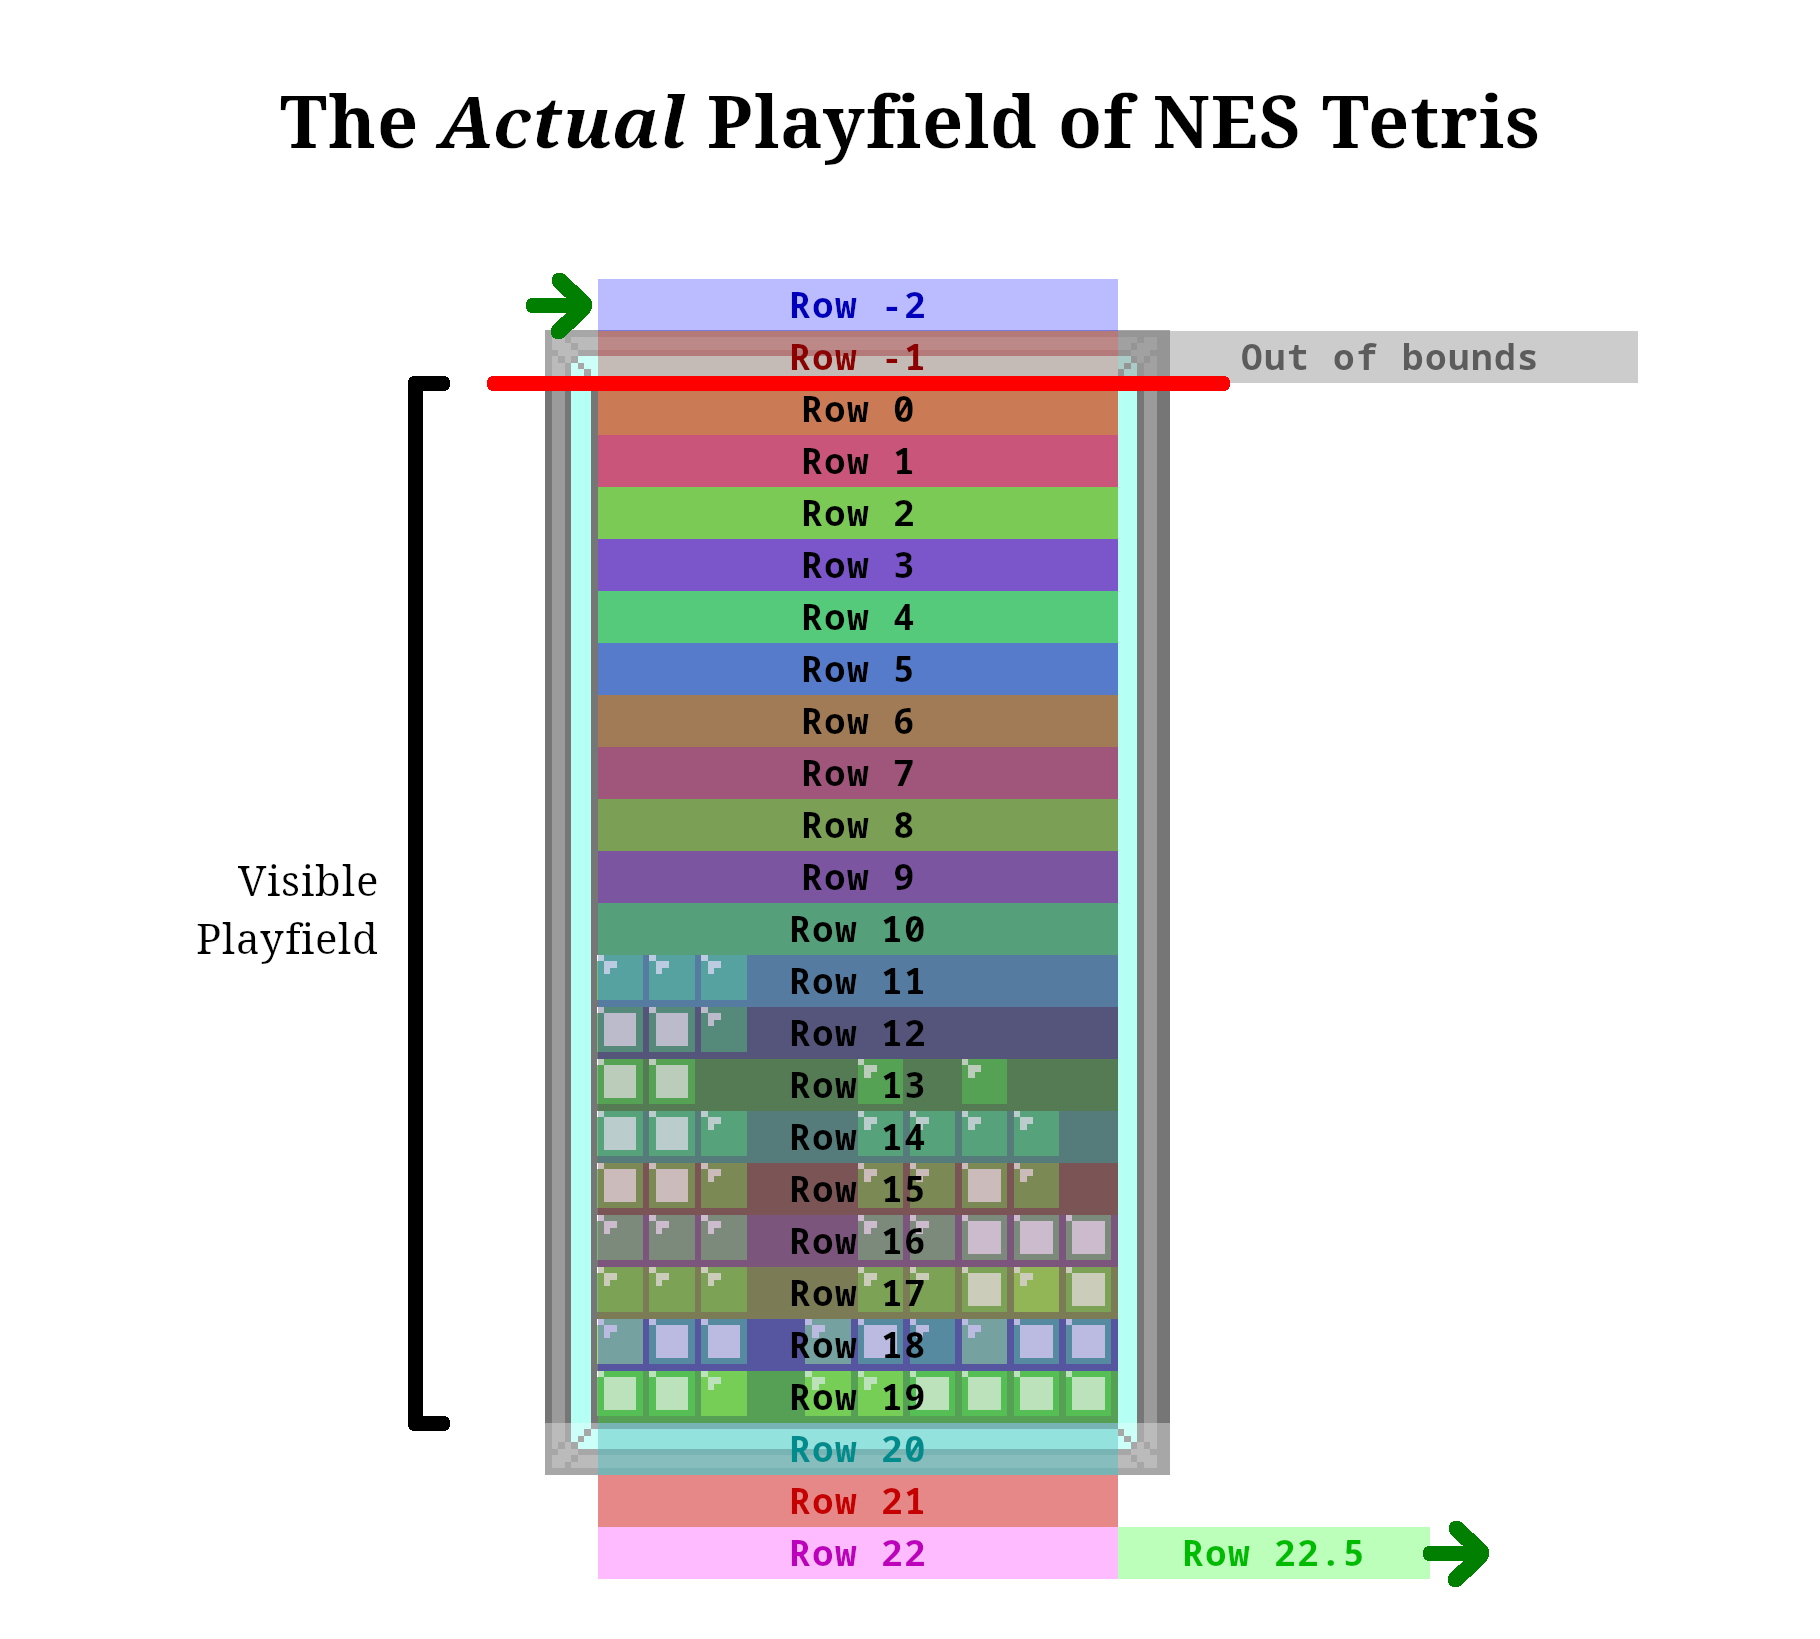 The Actual Playfield of NES Tetris: underneath the 20 visible rows, there are three additional rows, plus some partial data (labelled "row 22.5"); above the visible rows is two negatively indexed rows, with out of bounds space also shown after row -1.